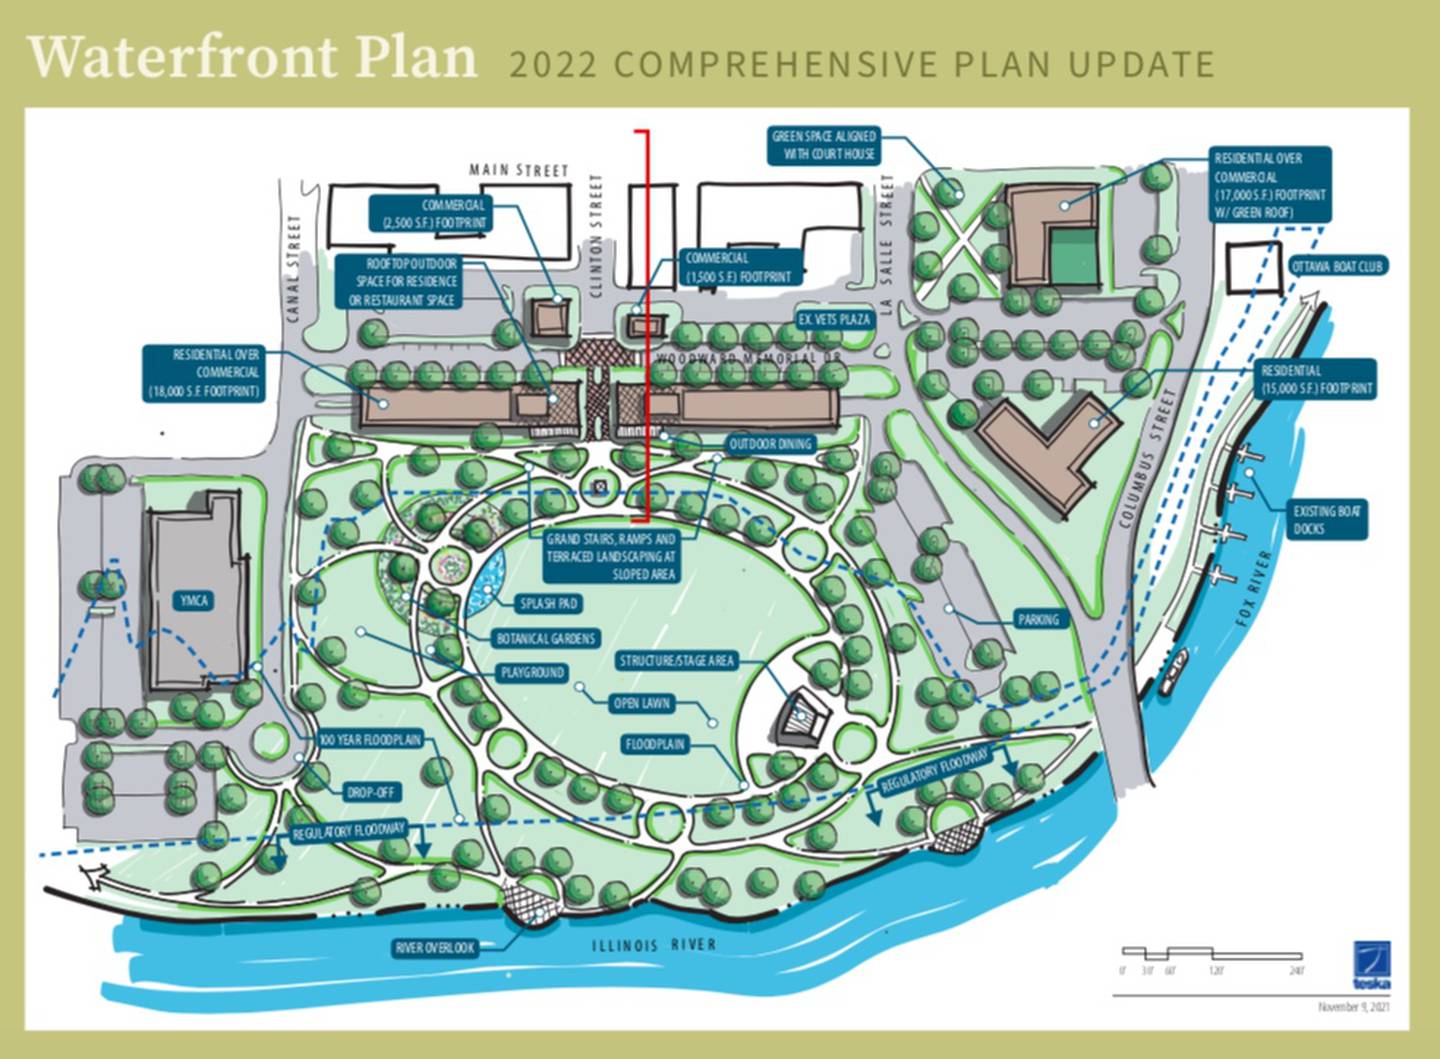 The new Ottawa riverfront plan calls for the elimination of a previously proposed marina to save development costs.